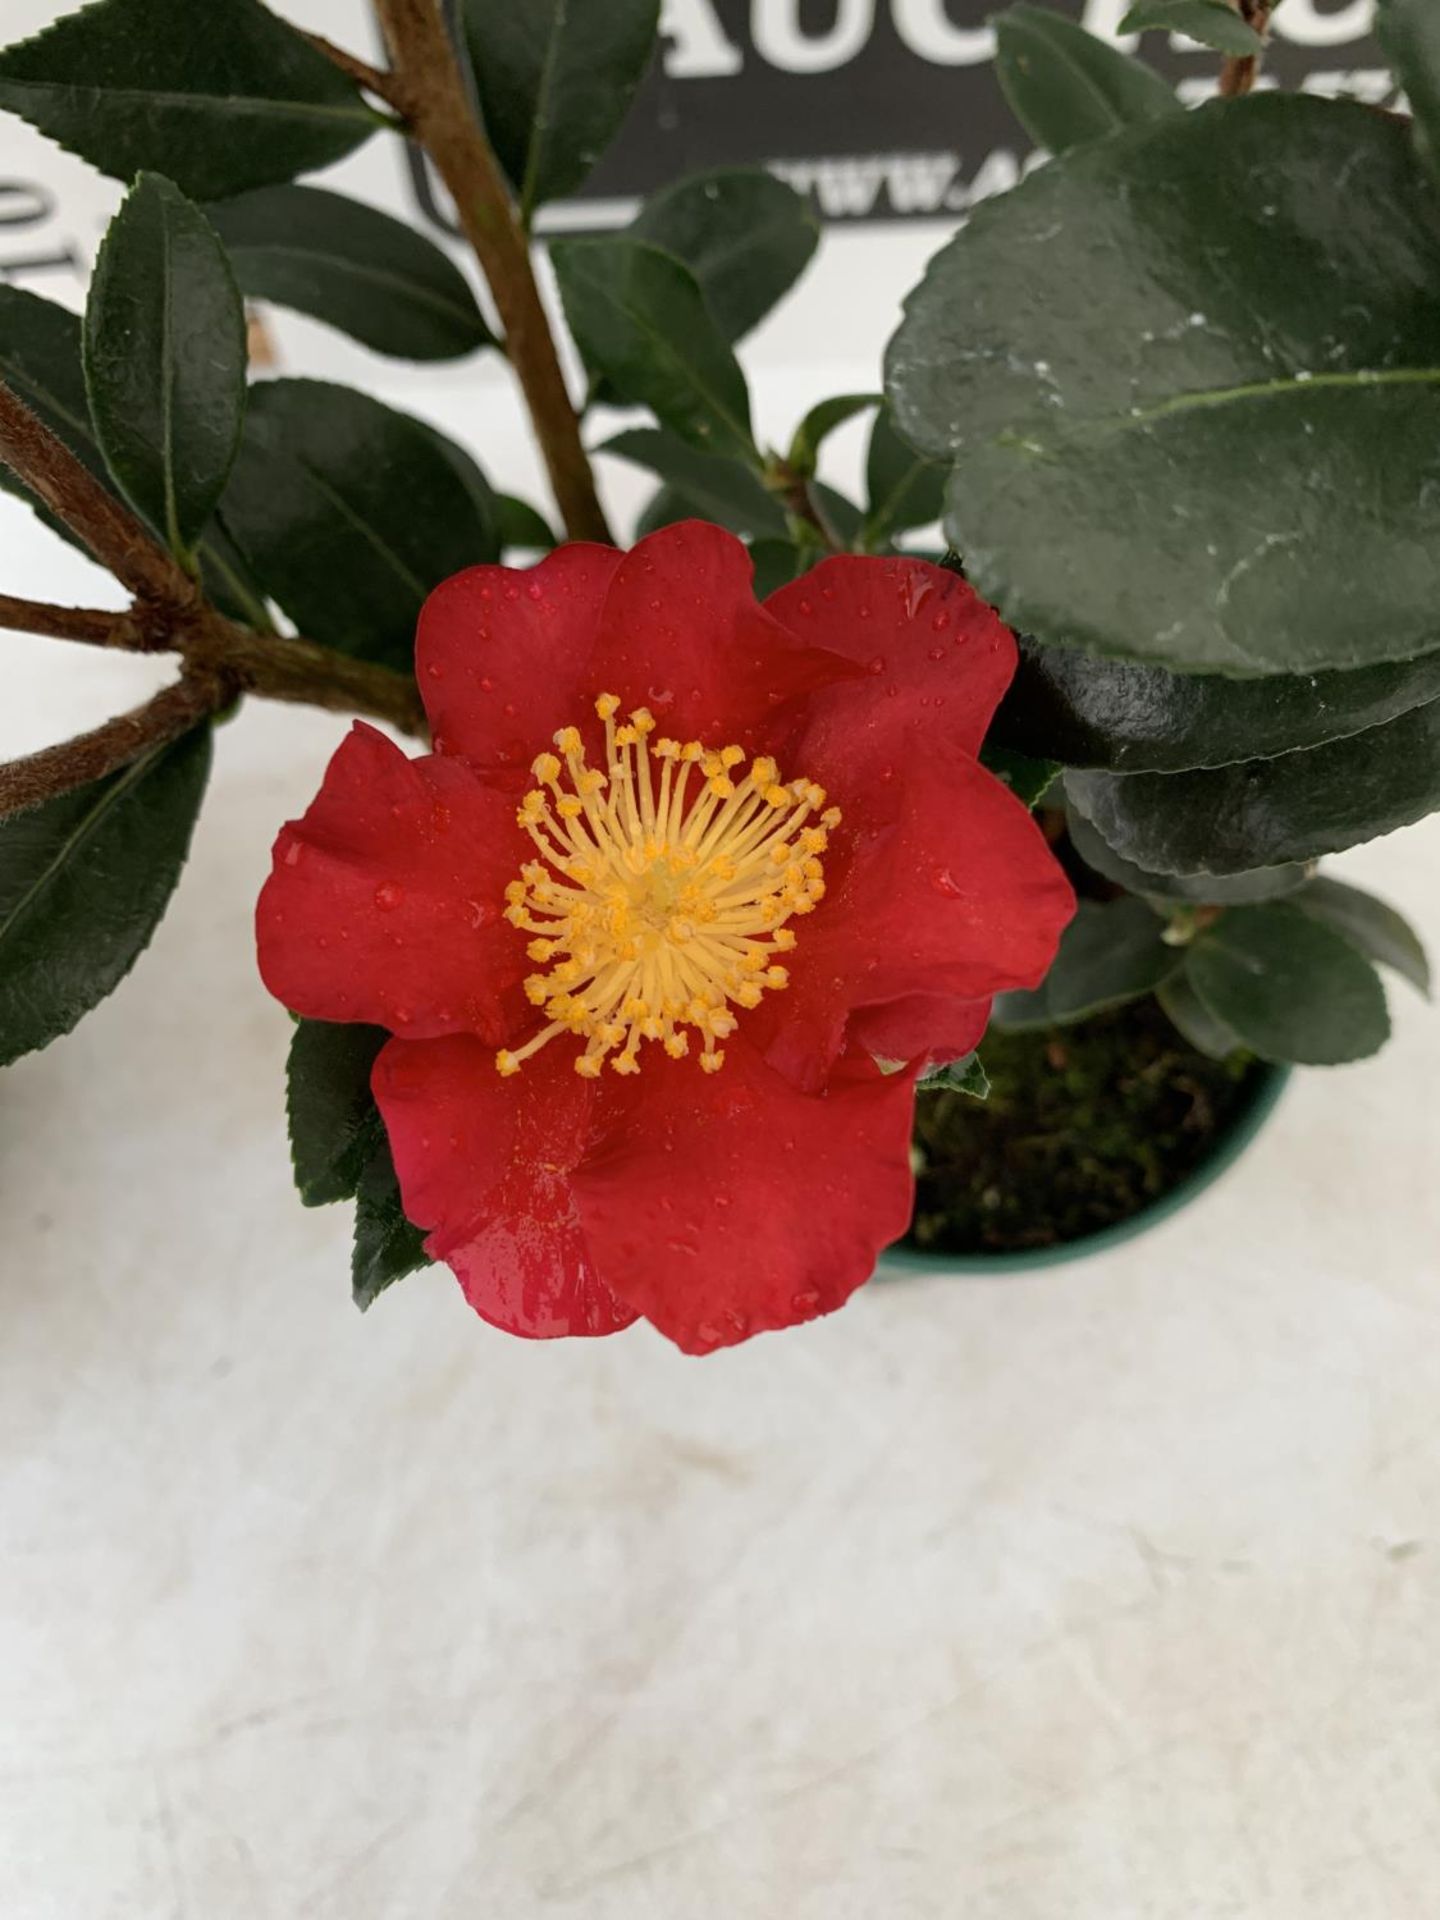 TWO CAMELLIA TERRA PLANTS 'YULETIDE' APPROX 70CM IN HEIGHT IN 1.5 LTR POTS PLUS VAT TO BE SOLD FOR - Image 2 of 5